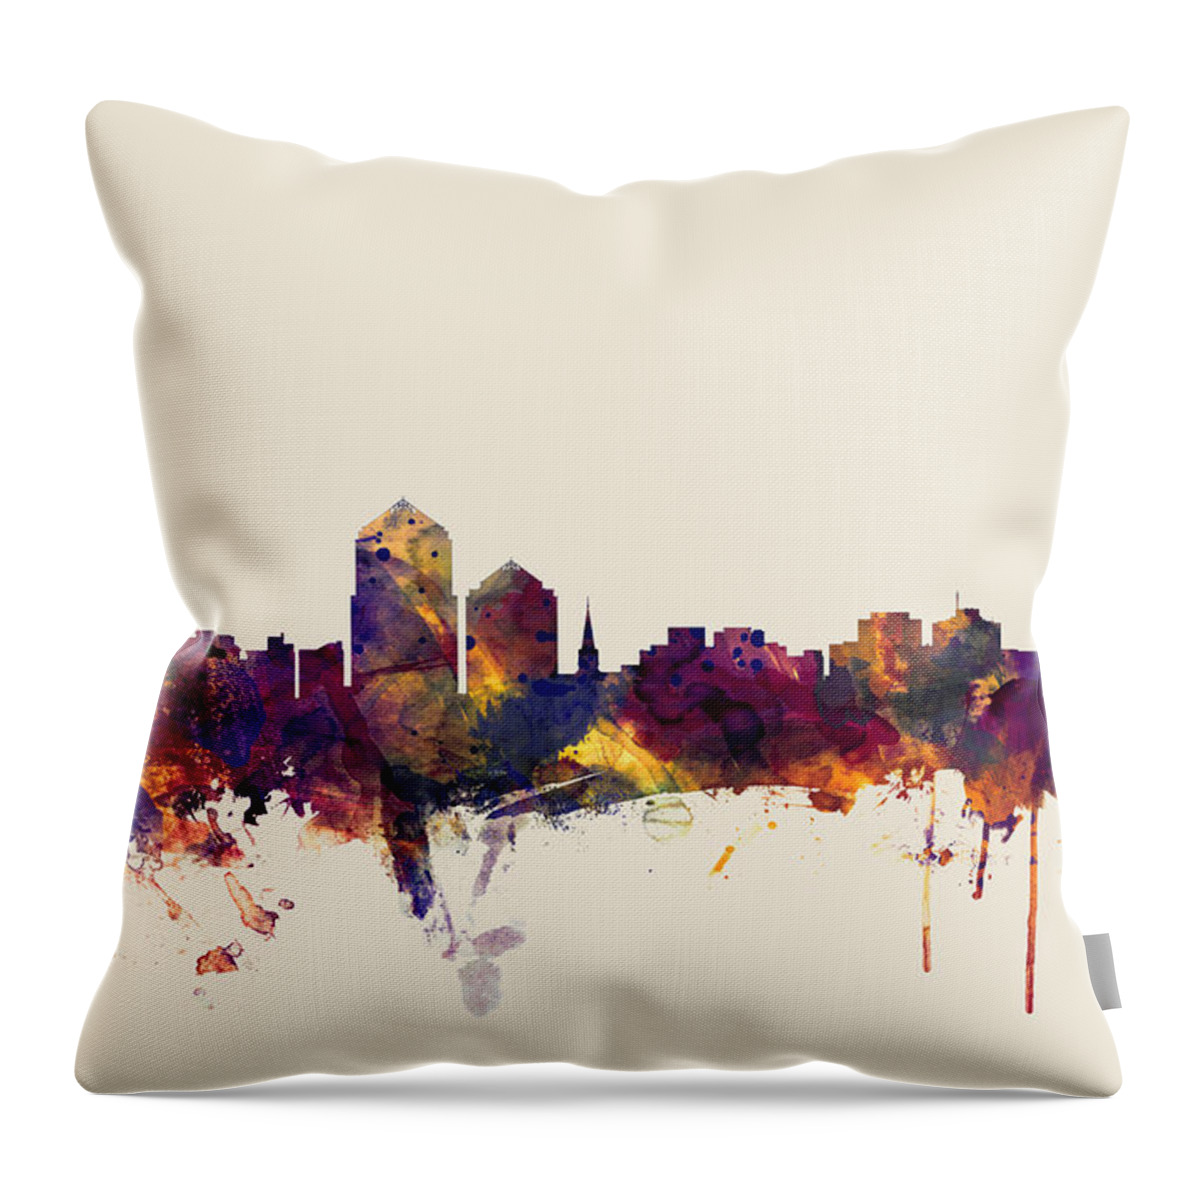 United States Throw Pillow featuring the digital art Albuquerque New Mexico Skyline by Michael Tompsett